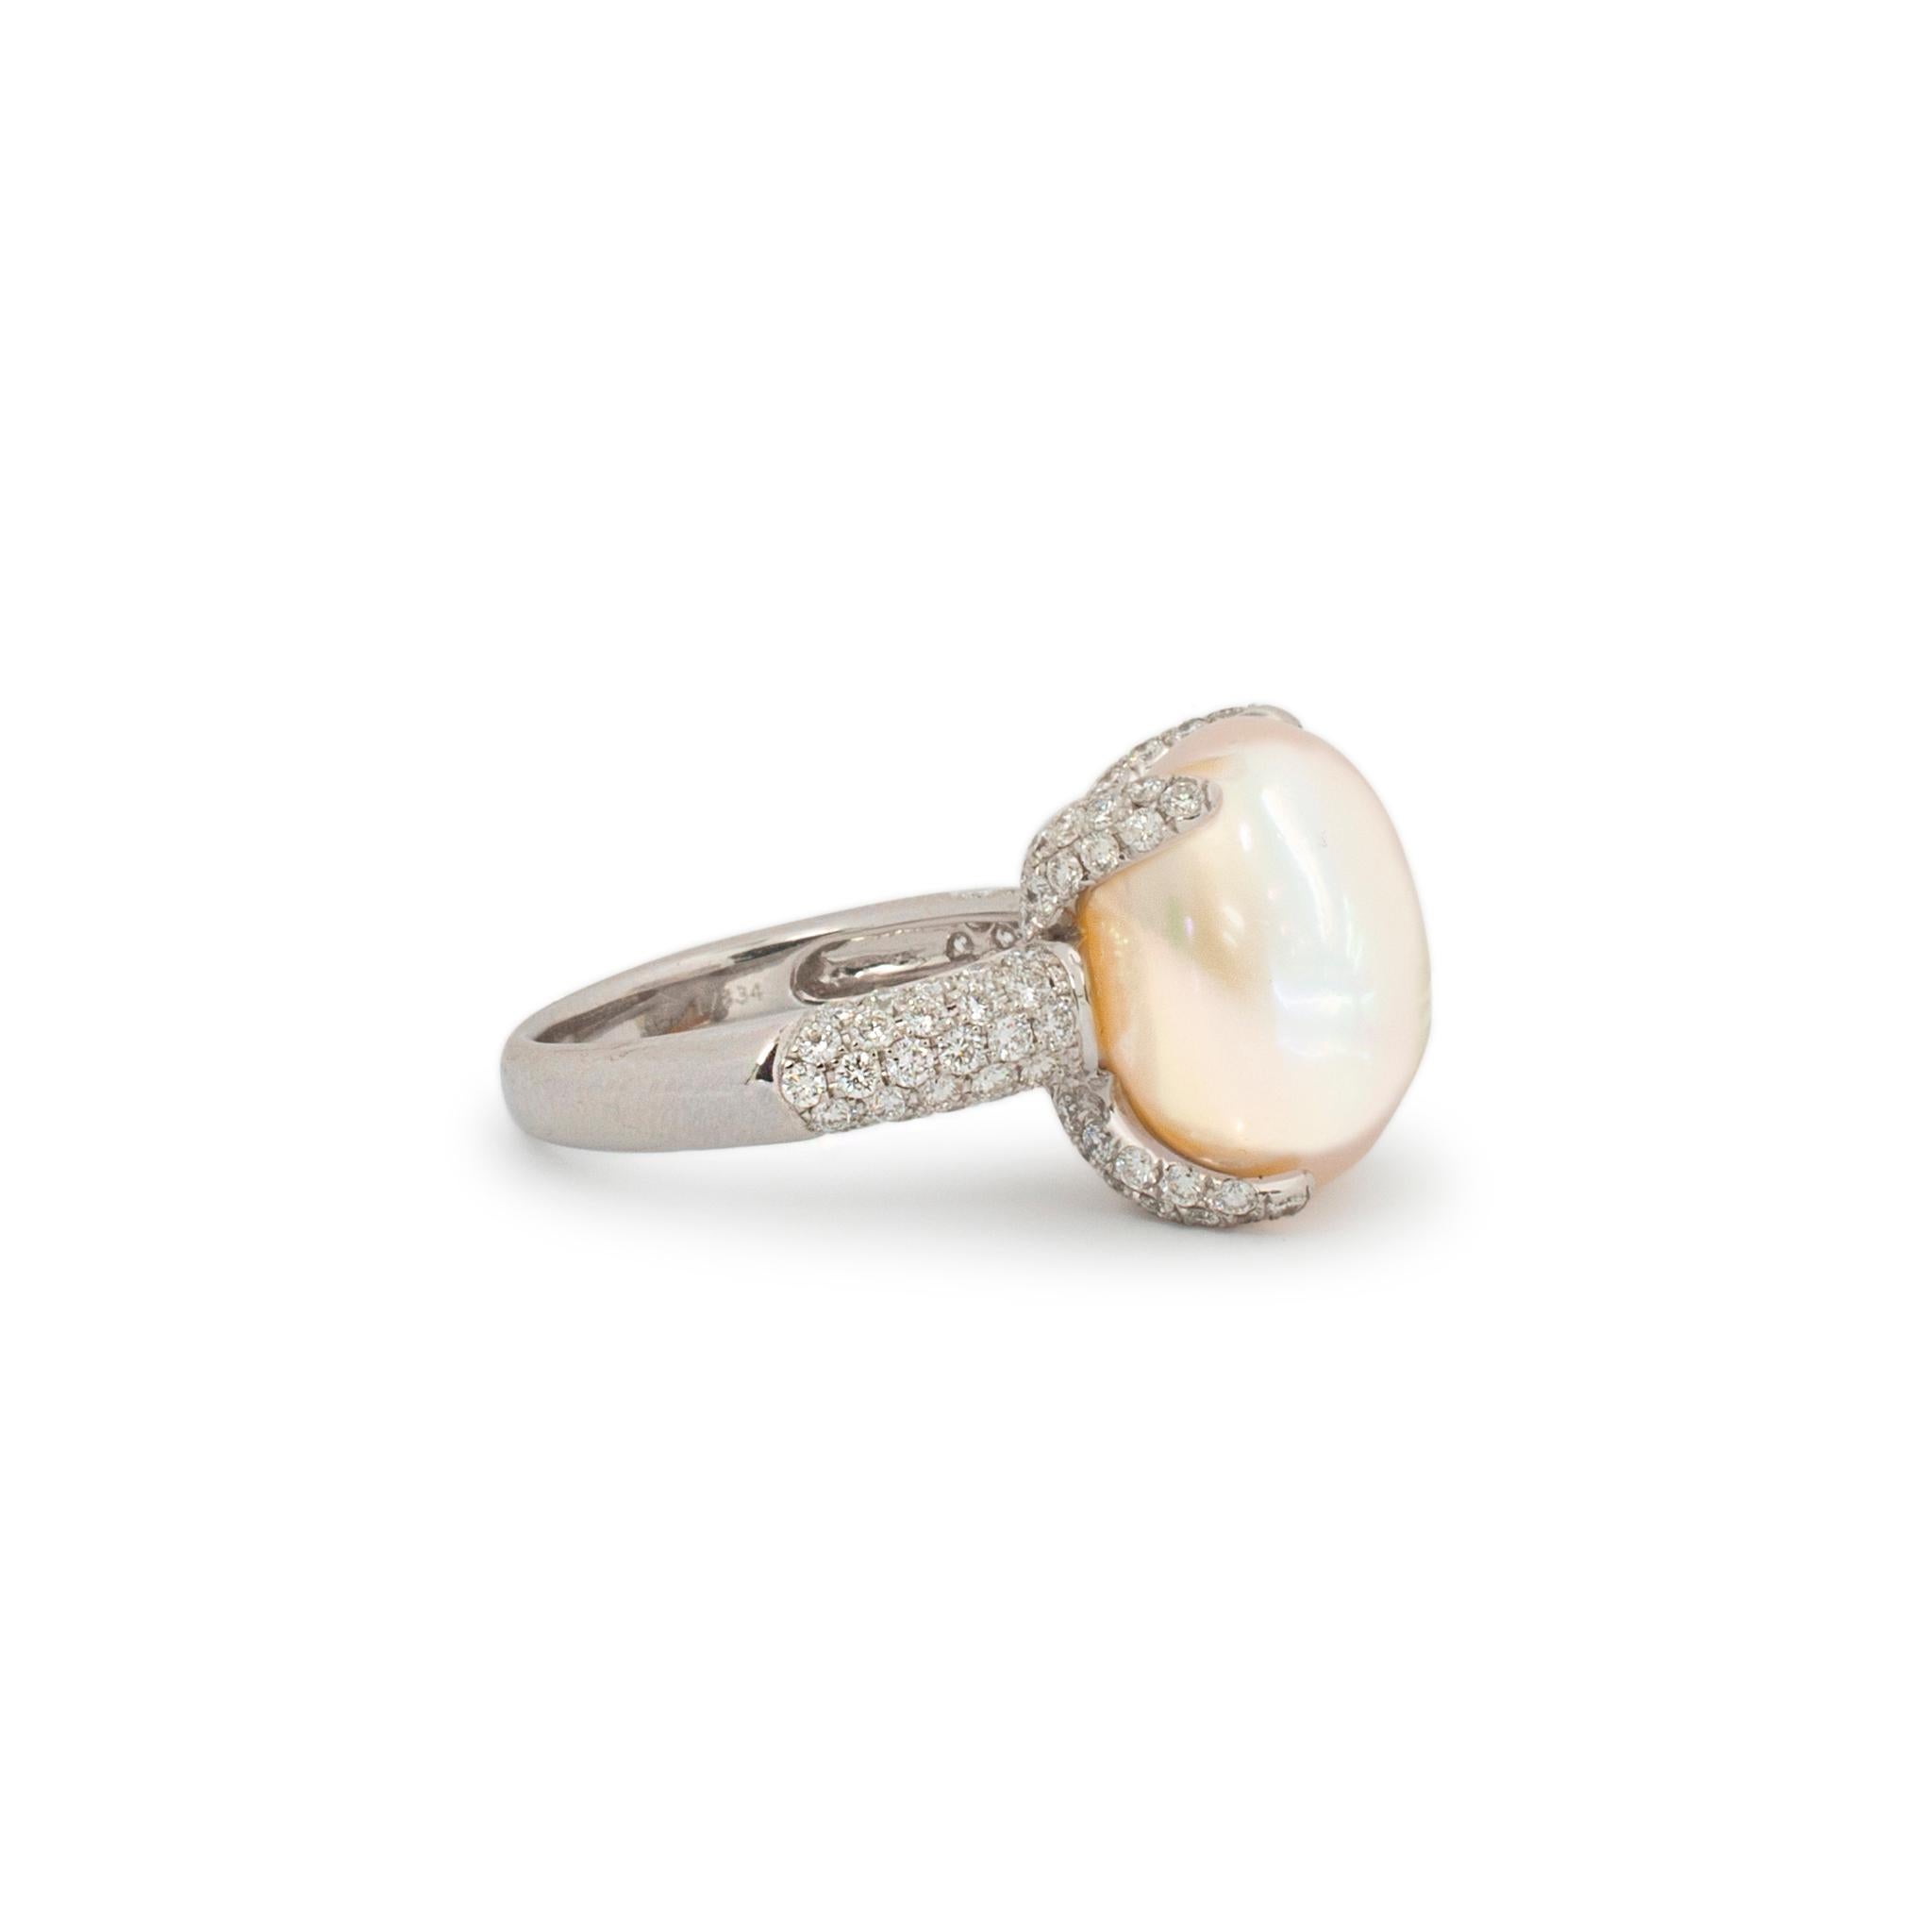 Ladies Vintage 18k White Gold Pearl & Diamonds Cocktail Ring In Excellent Condition For Sale In Houston, TX